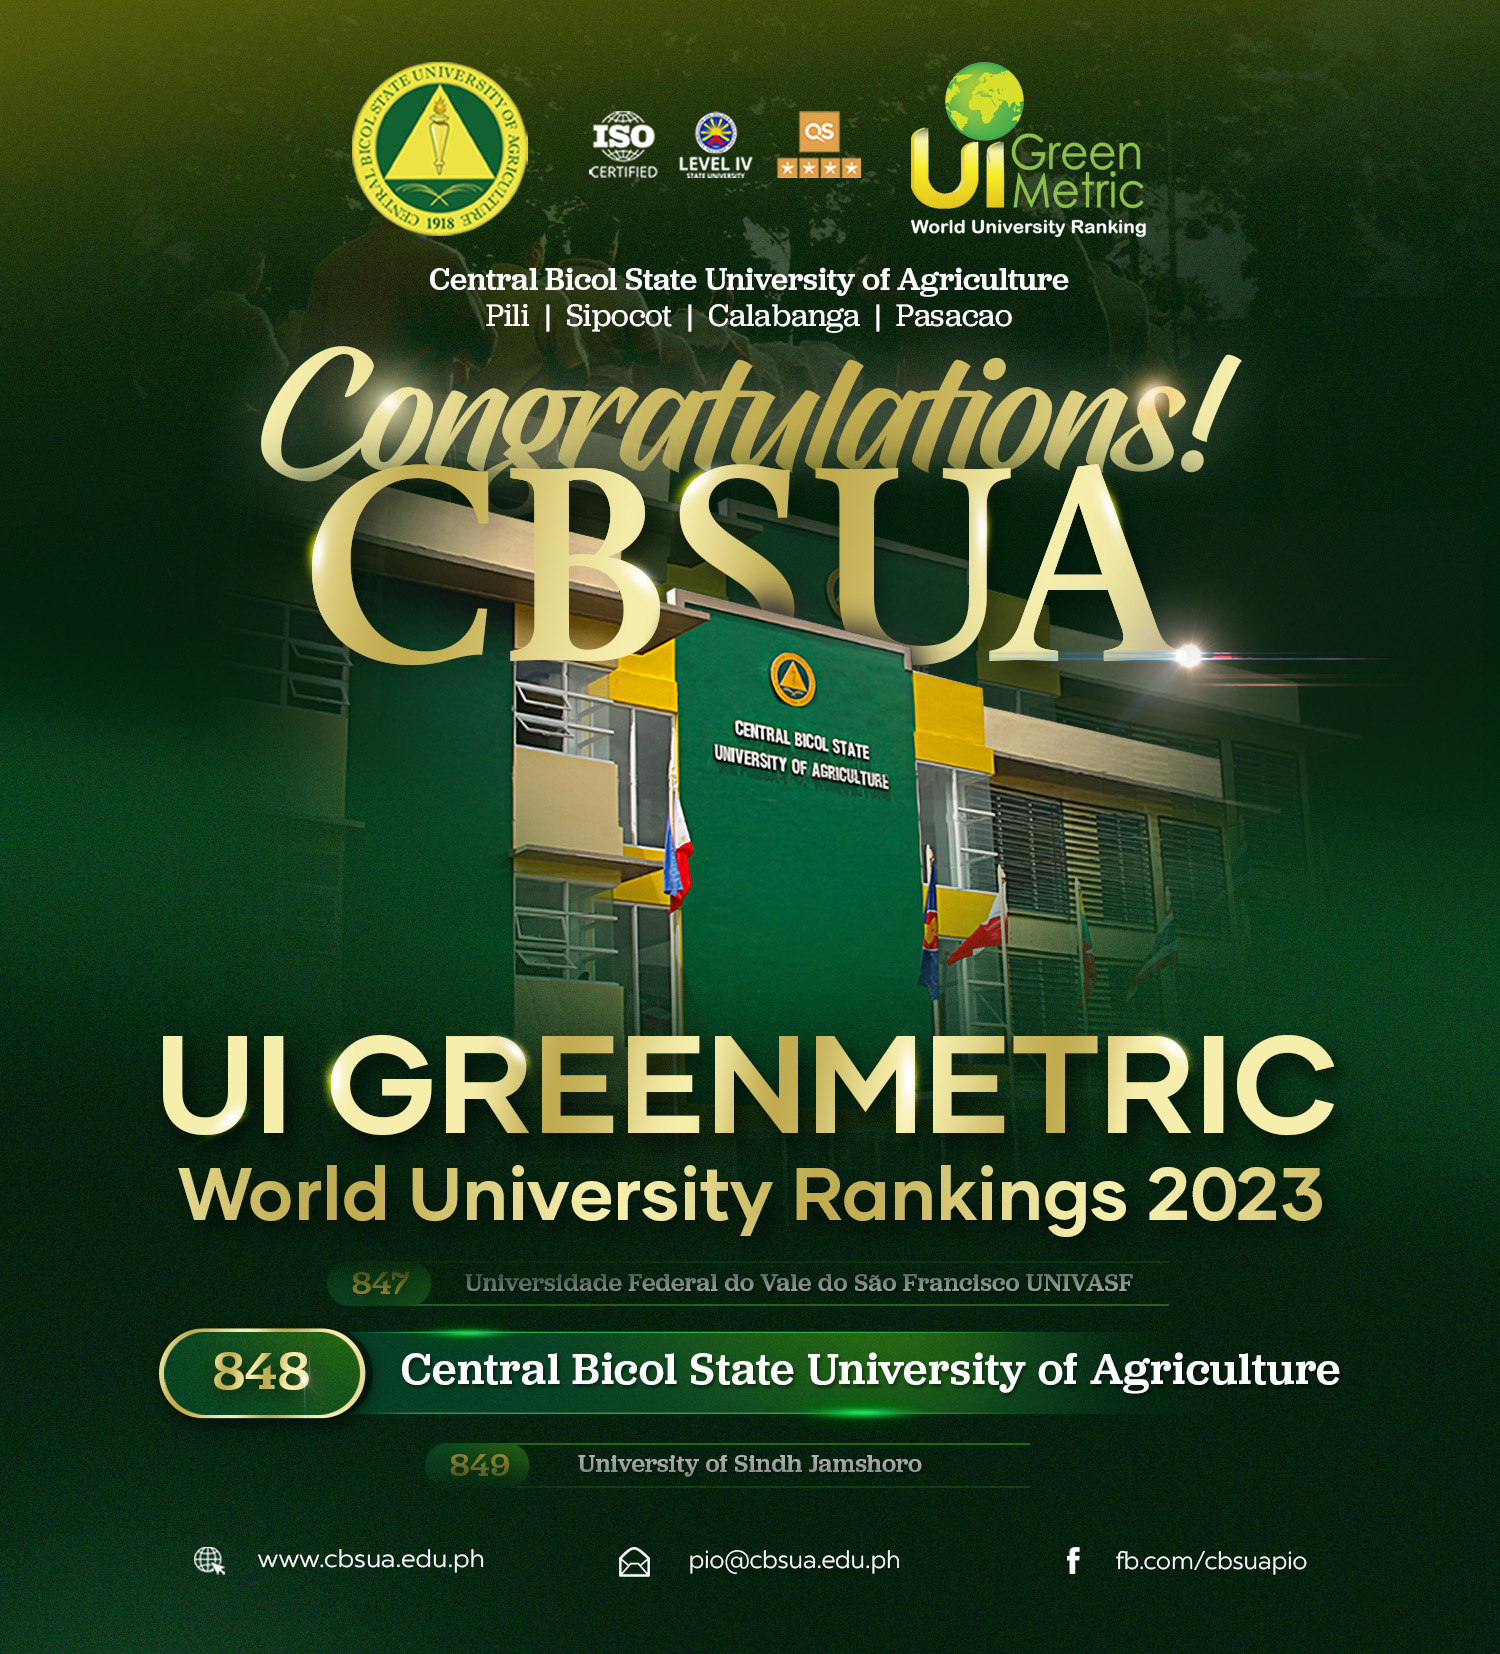 CBSUA SECURES POSITION IN UI GREENMETRIC WORLD UNIVERSITY RANKING